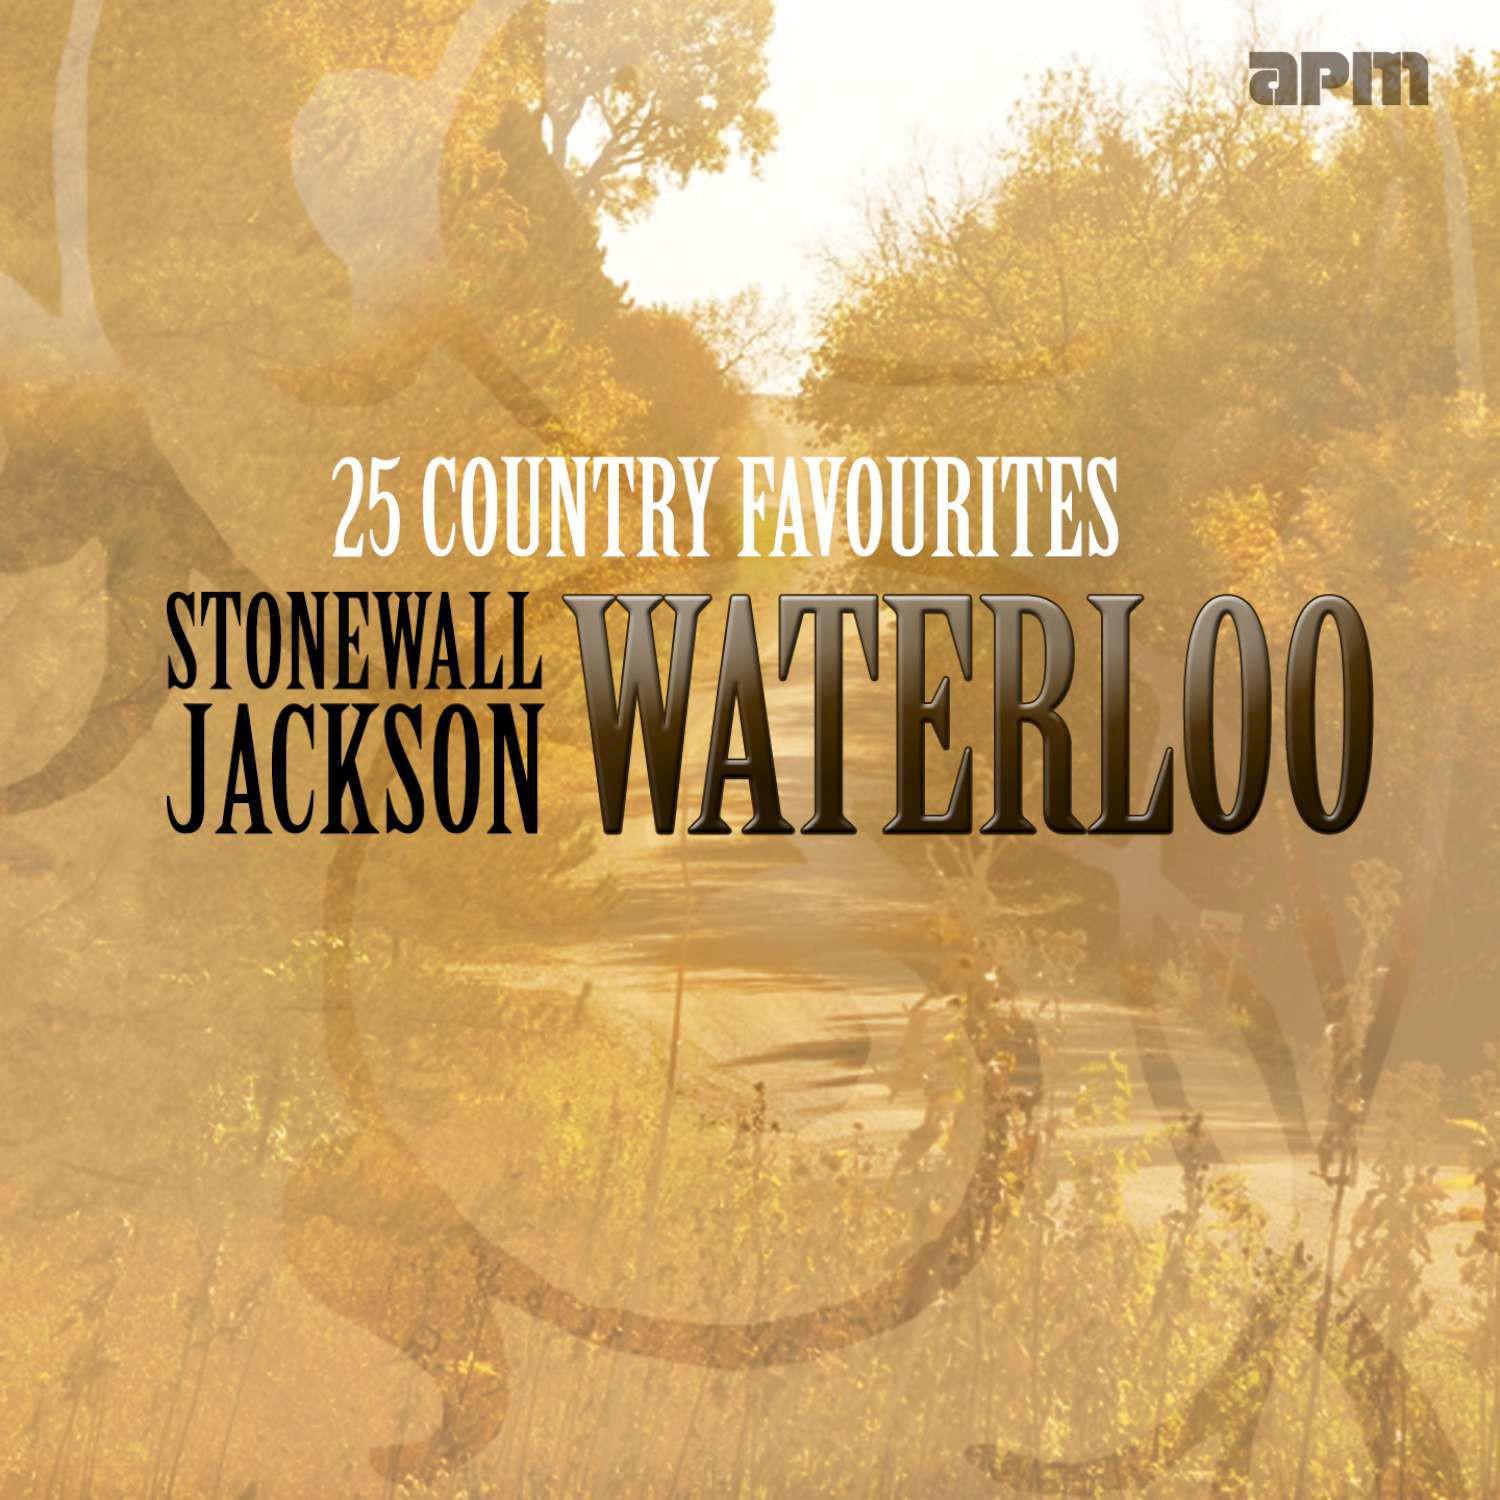 Waterloo - 25 Country Favourites